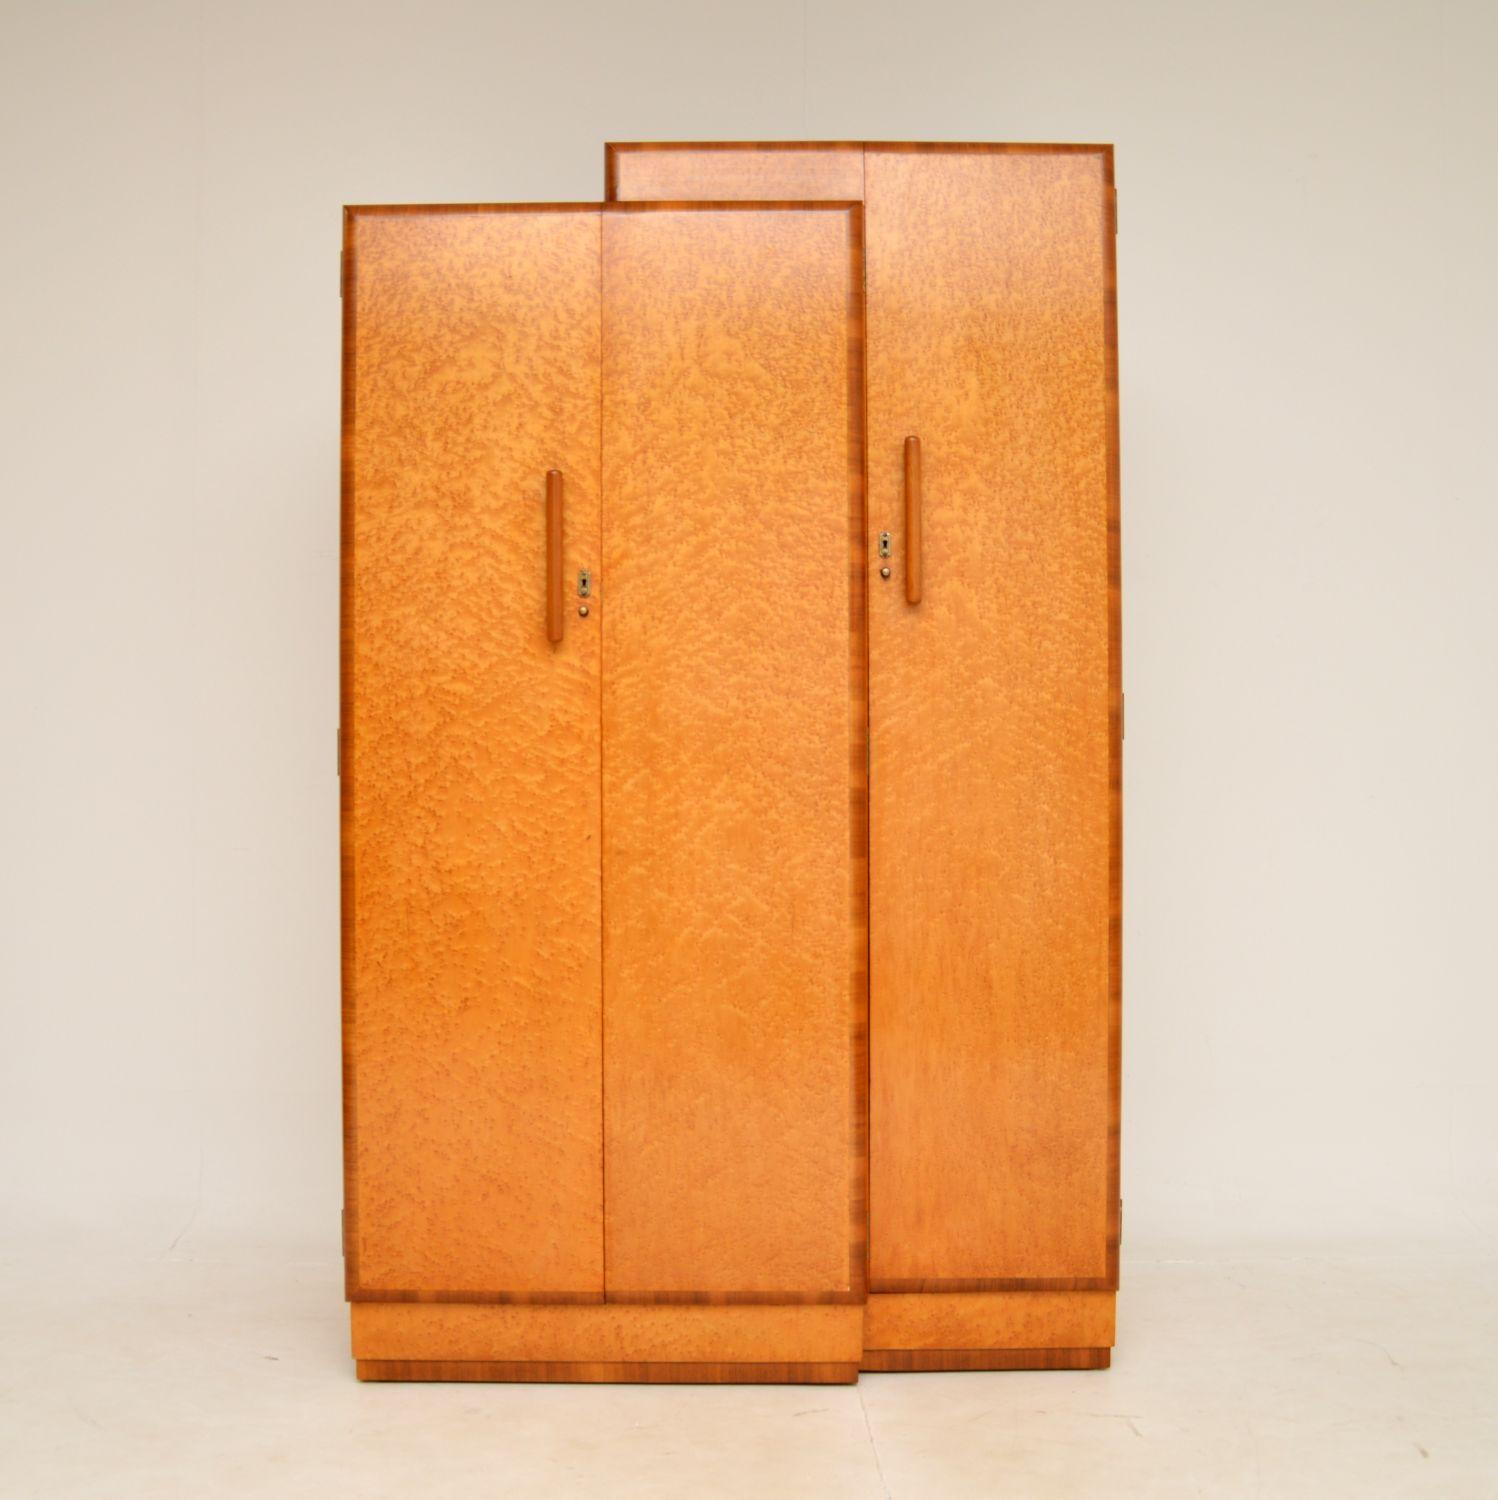 A spectacular original Art Deco birds eye maple and walnut wardrobe. This was made in England, it dates from the 1920-30’s.

This is one of the most unusual and stylish wardrobes of the period we have ever come across. It is beautifully designed and